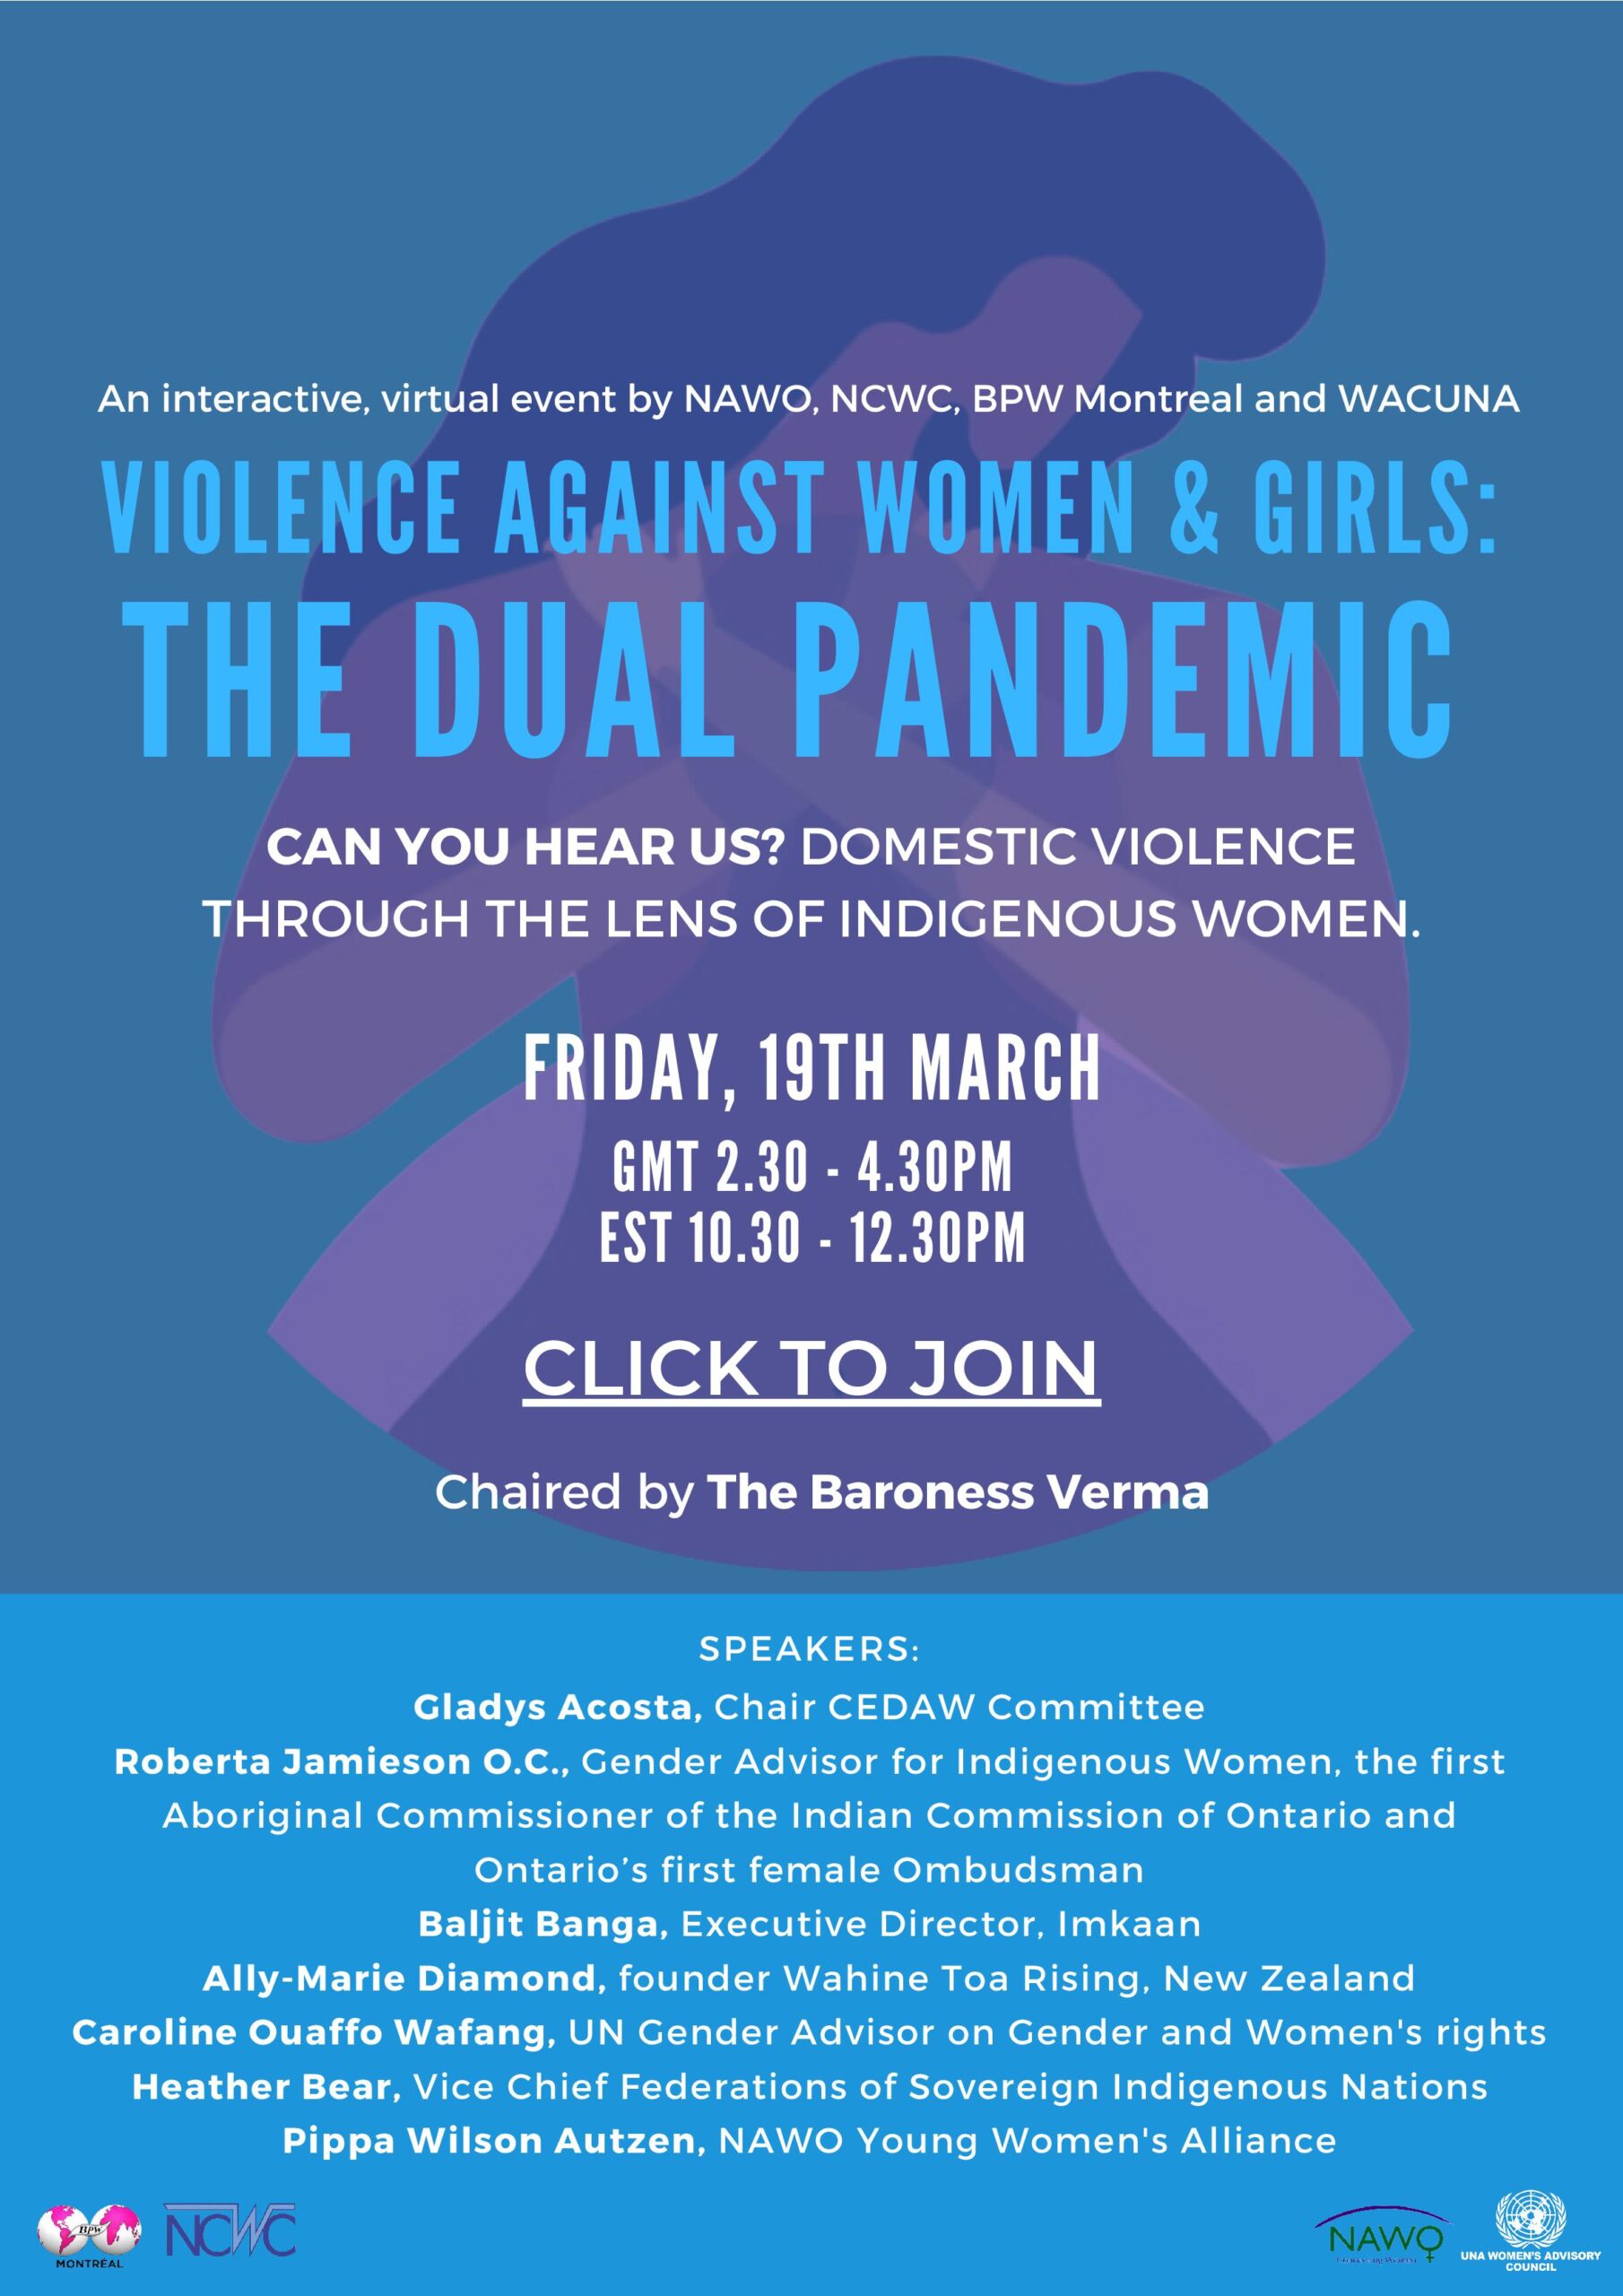 Violence against women and girls: The dual pandemic